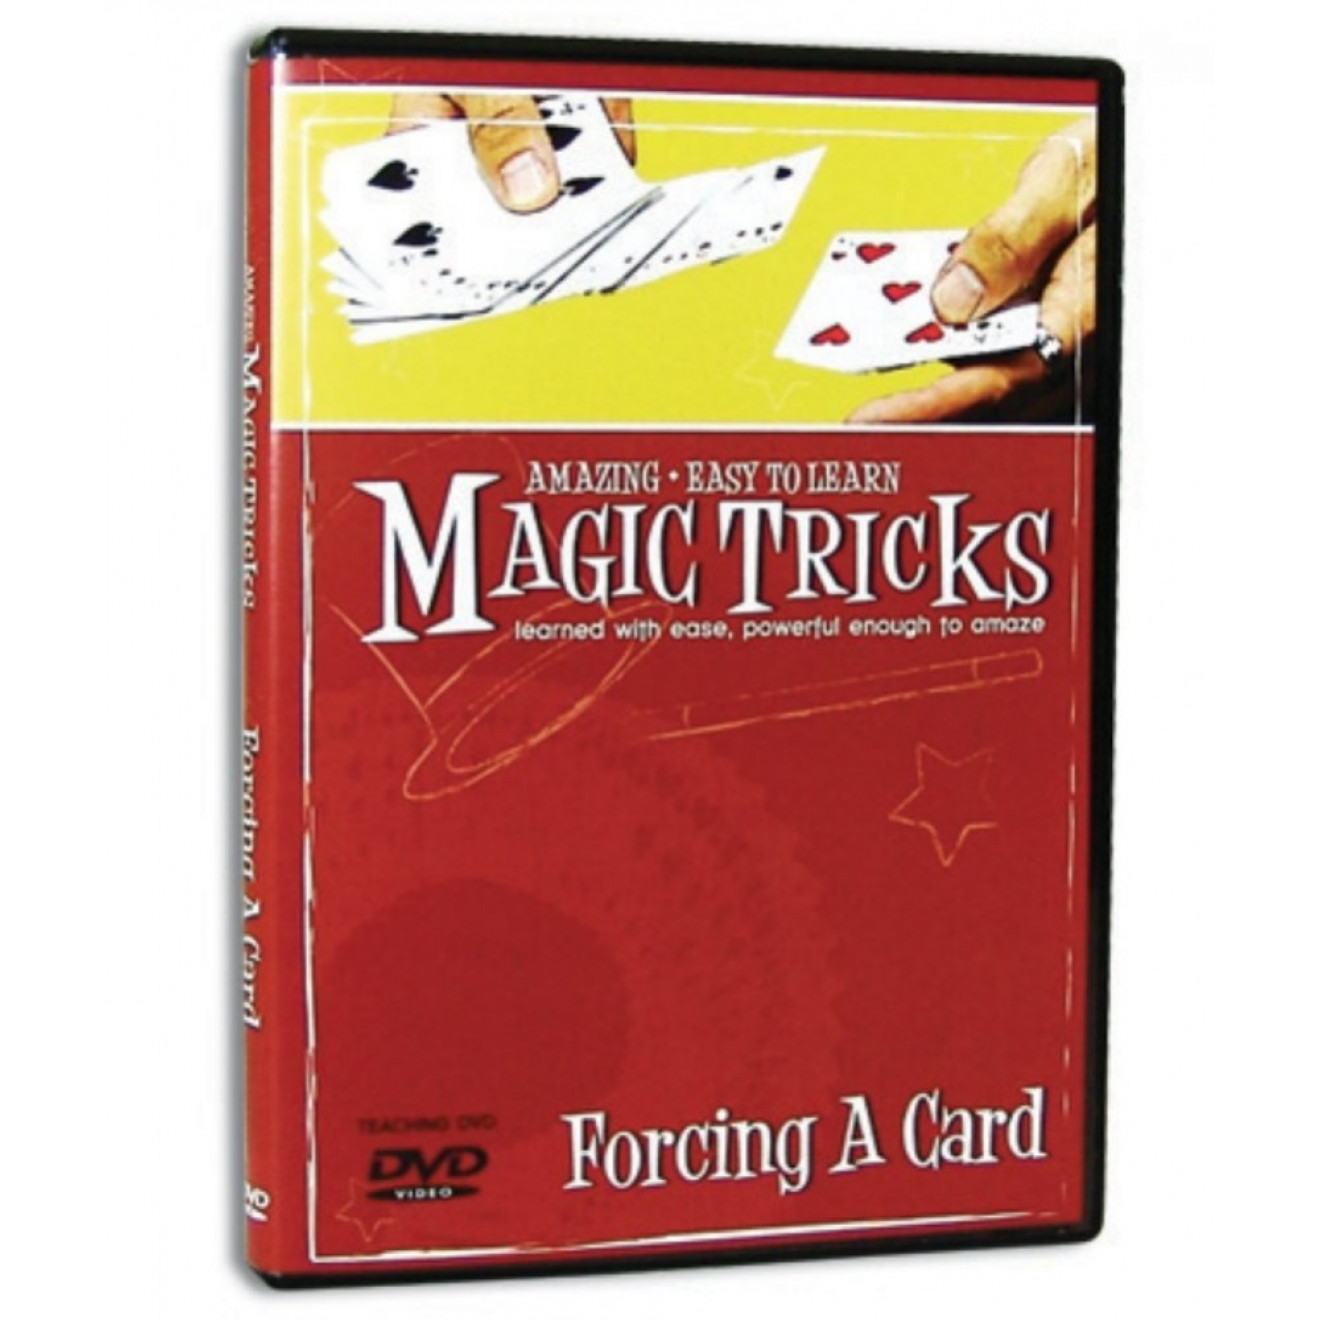 Amazing Easy To Learn Magic Tricks - Forcing A Card